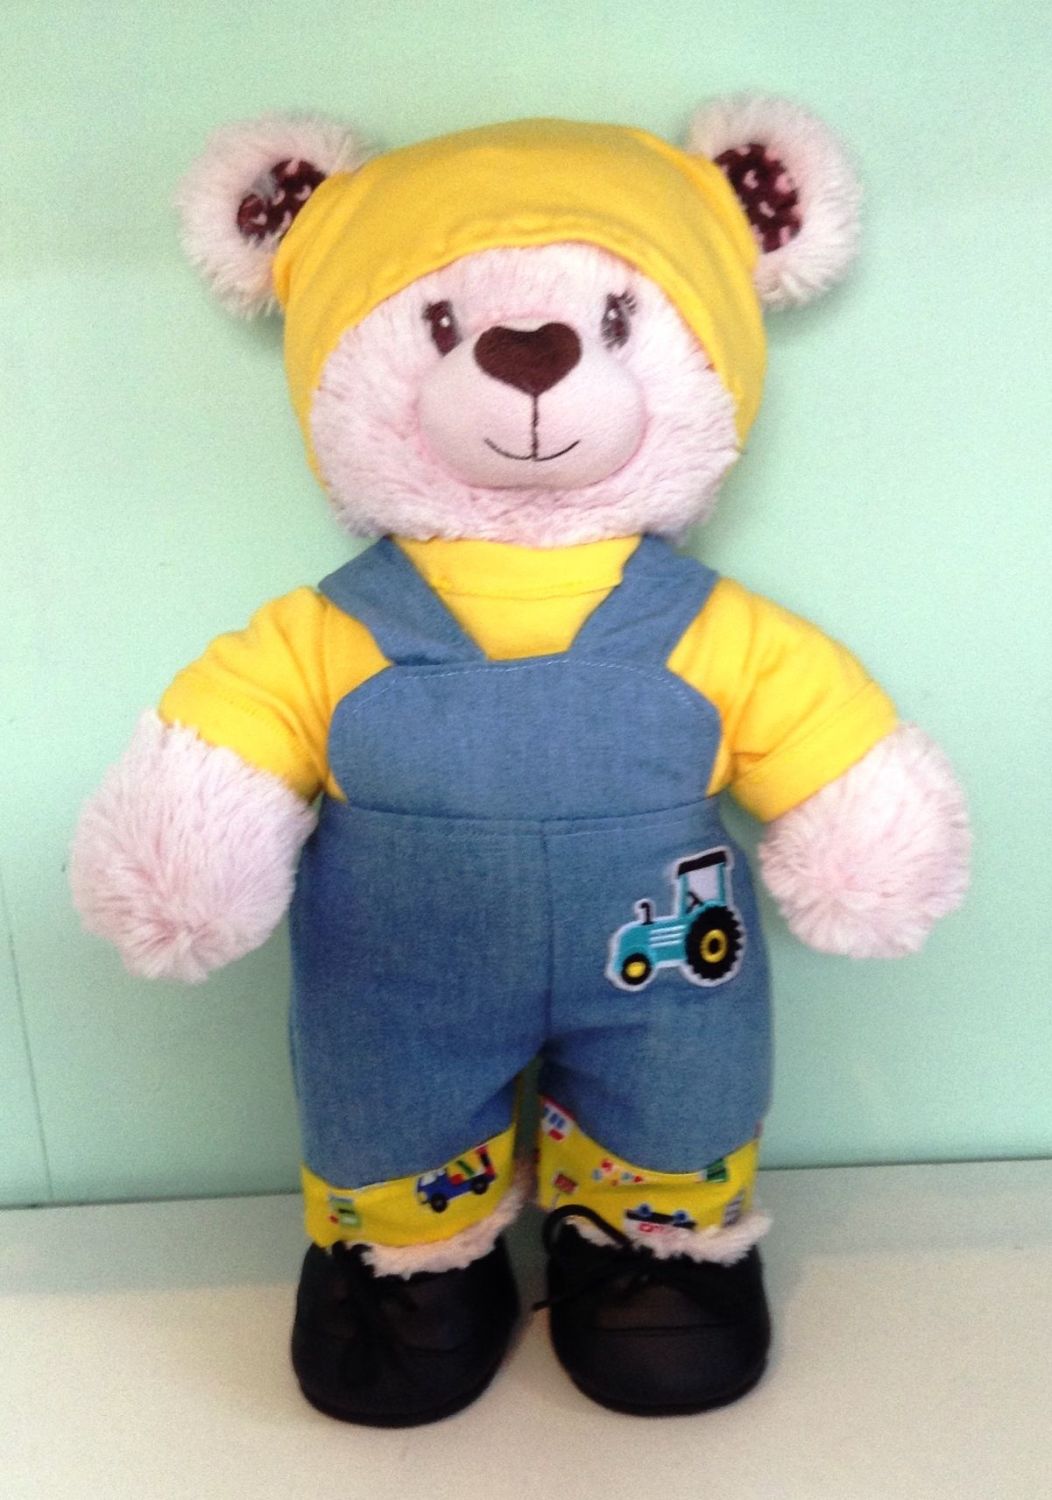 Teddy bear's Dungaree set made to fit an 18 inch high teddy bear including 